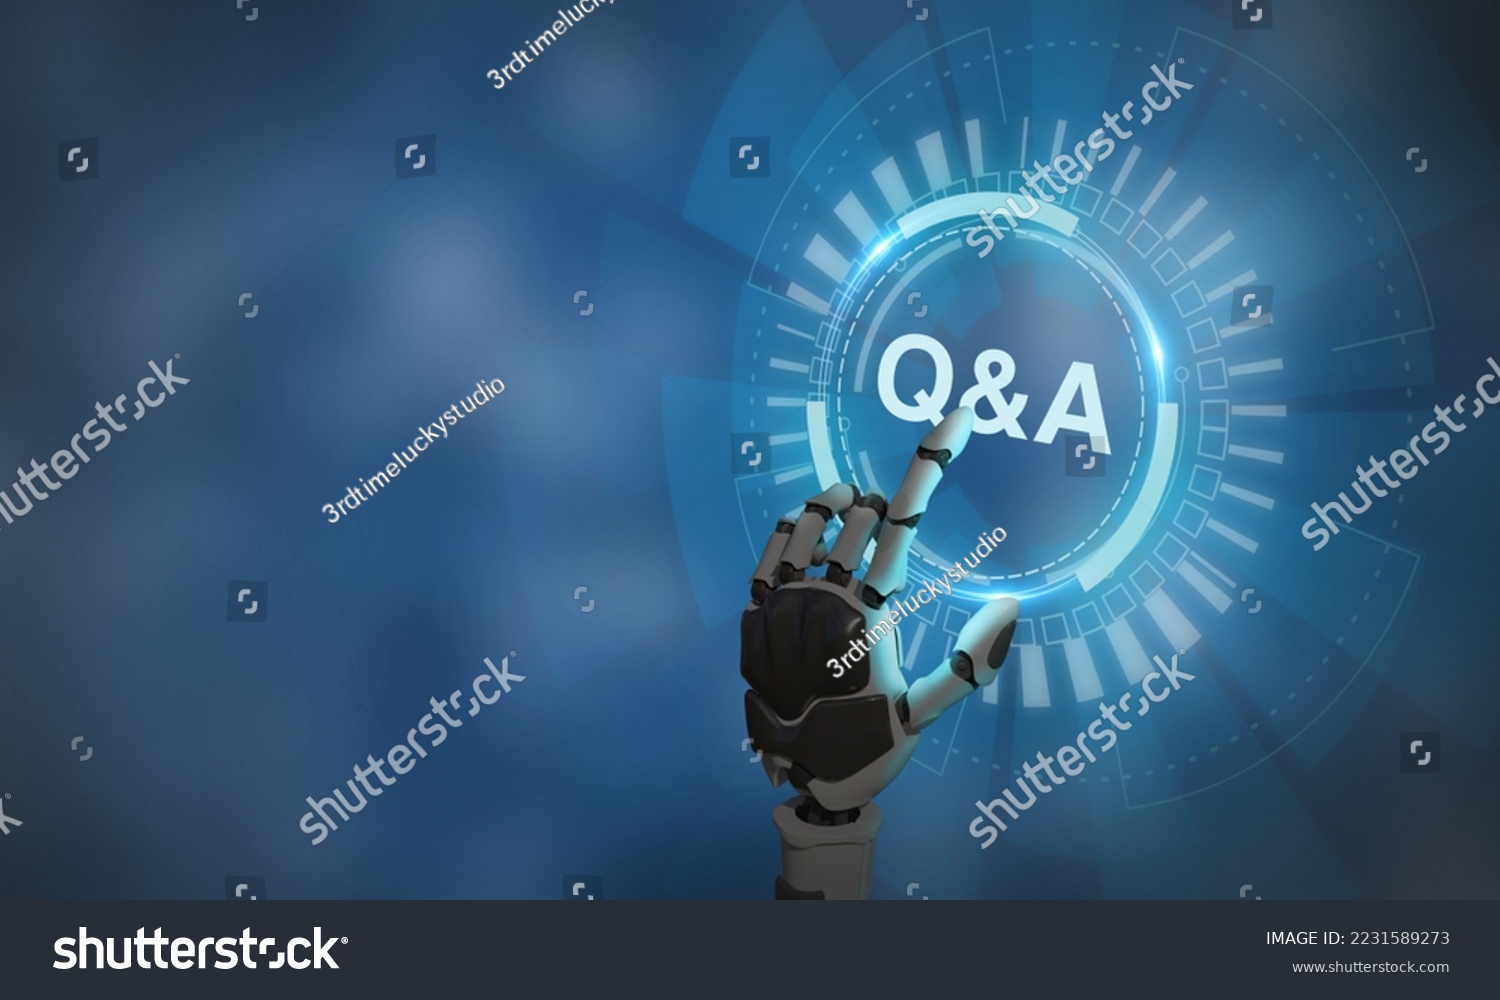 Q and A - an abbreviation on smart background. Chatbot technology concept. Artificial intelligence (AI) applications and innovation. Frequently asked questions in websites, social networks, business. #2231589273